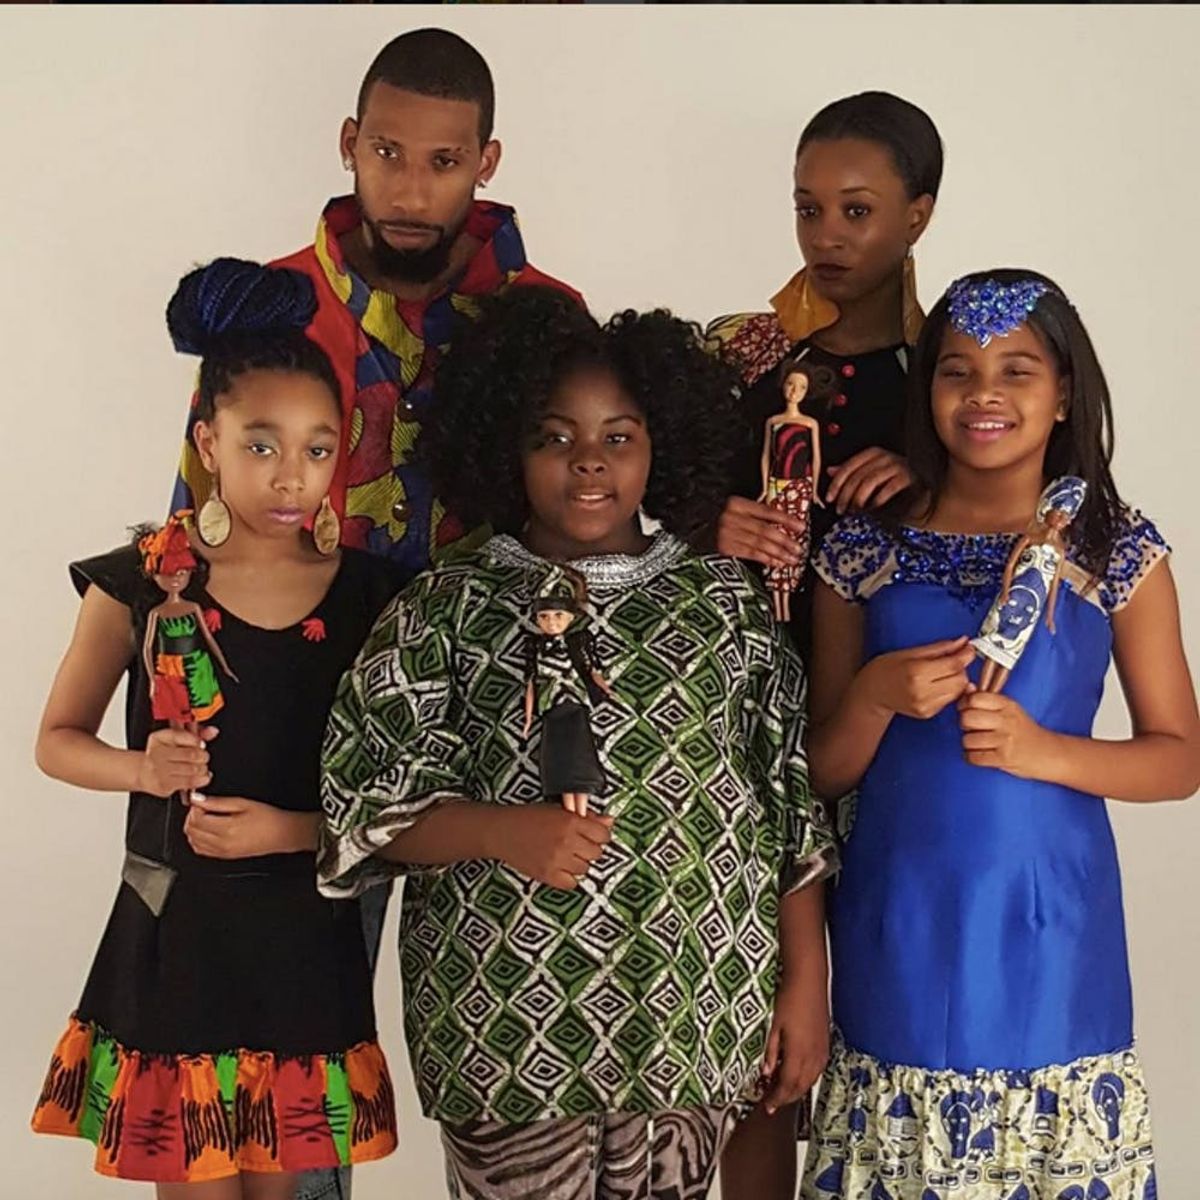 This 10-Year-Old’s Fashion Line Is The Best Response to Bullies